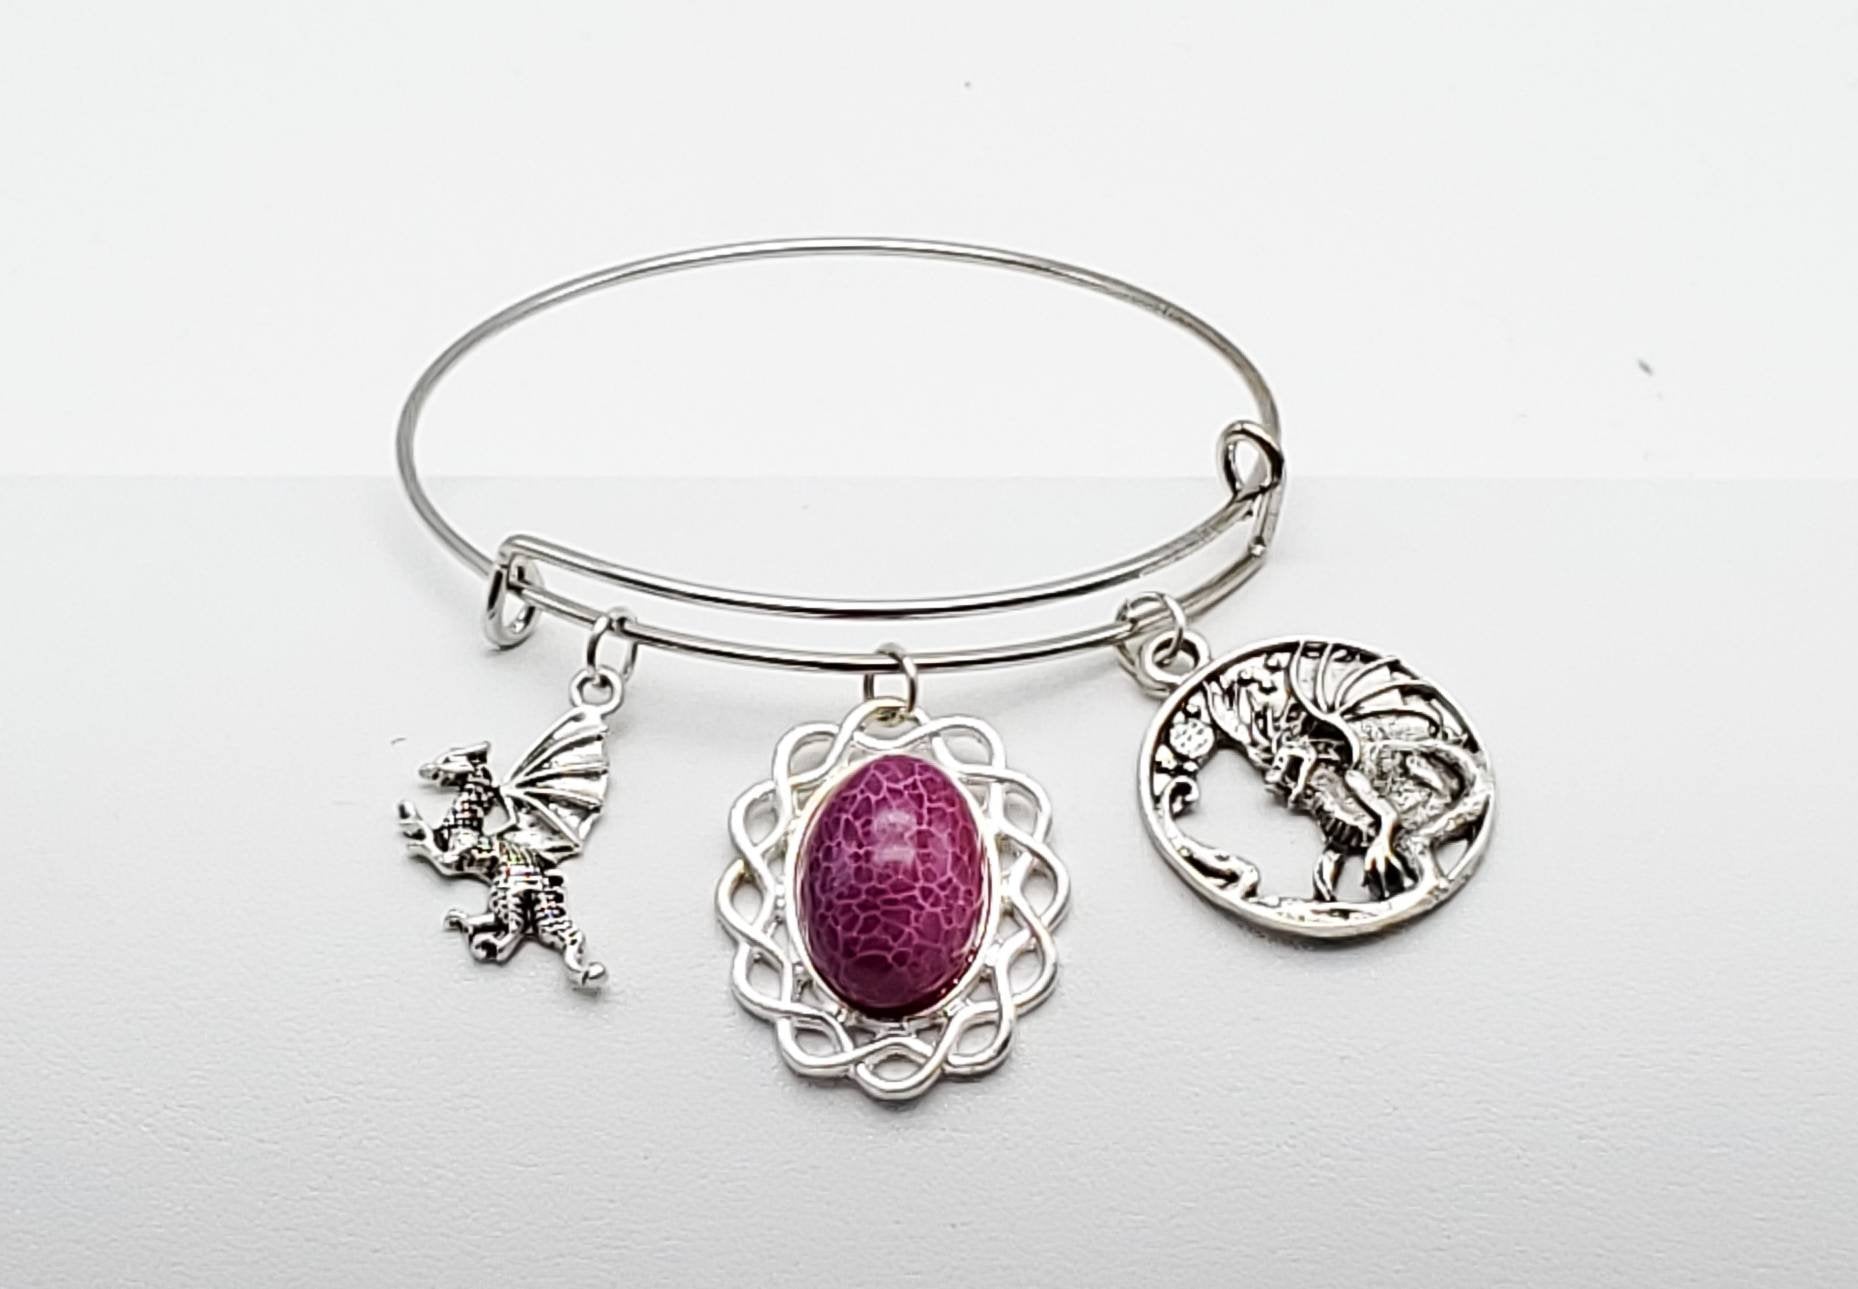 Charm Bangle with Dragon Charms and Pink Dragon Vein Agate - The Caffeinated Raven